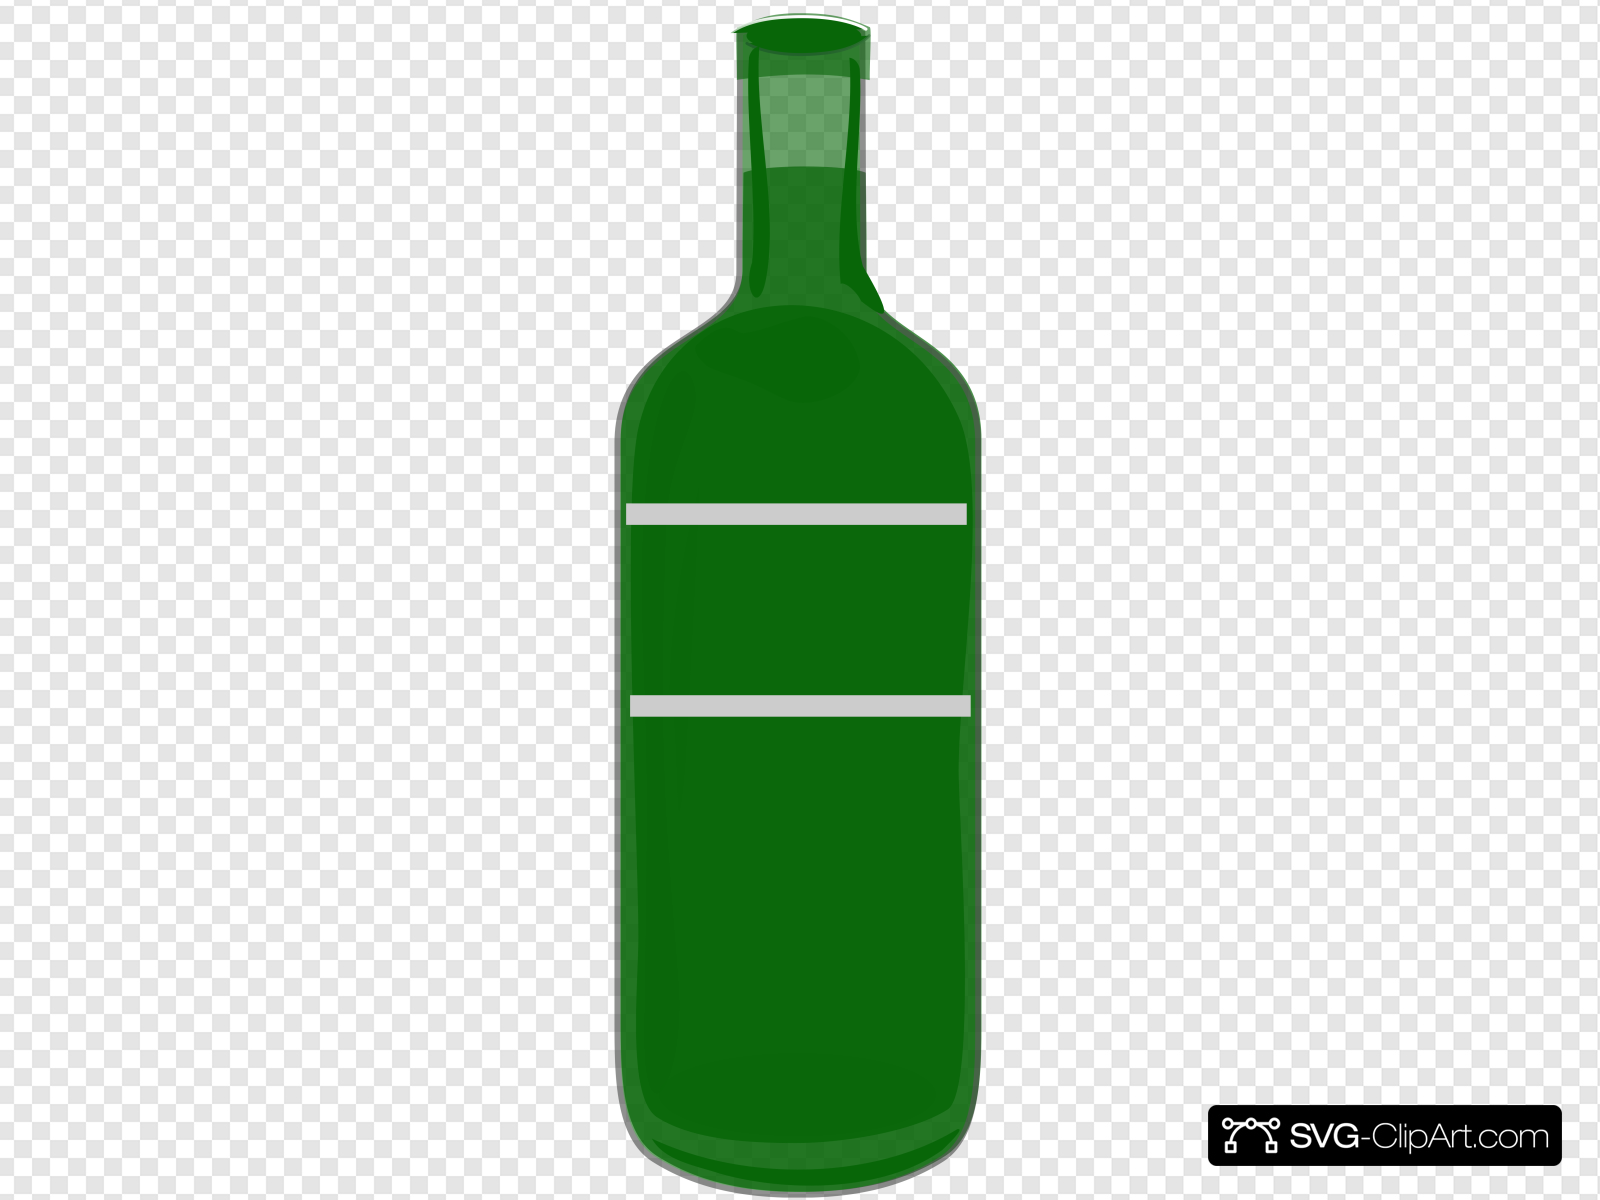 Green Wine Bottle Clip art, Icon and SVG